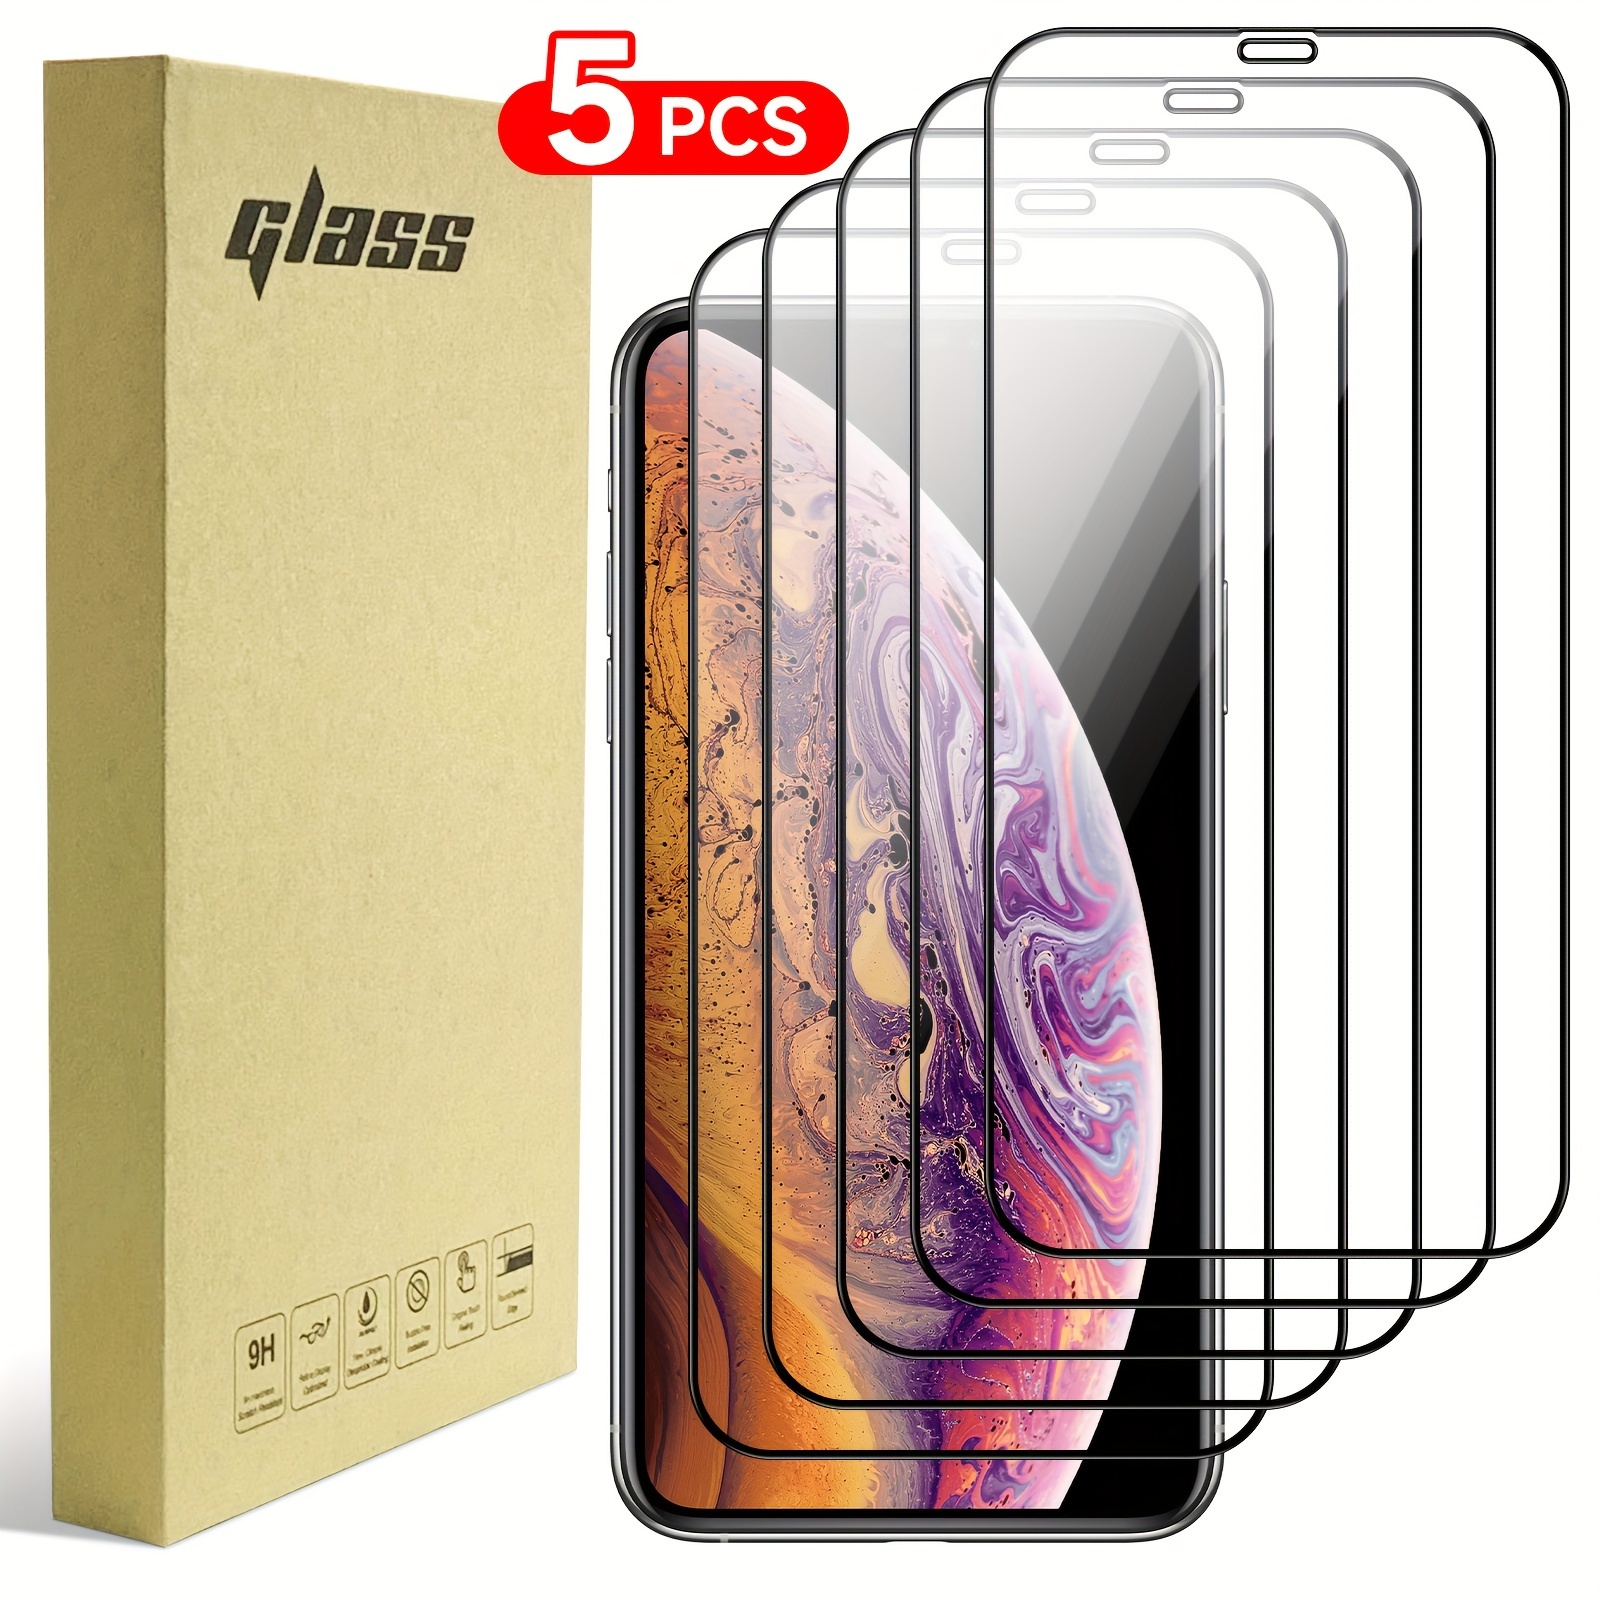 

5pcs Tempered Glass Screen Protector With Suitable For Iphone Xs Max/xr Series, Ultra-high Definition, 9h Hardness, Scratch And Shatter Resistant, Easy To Install